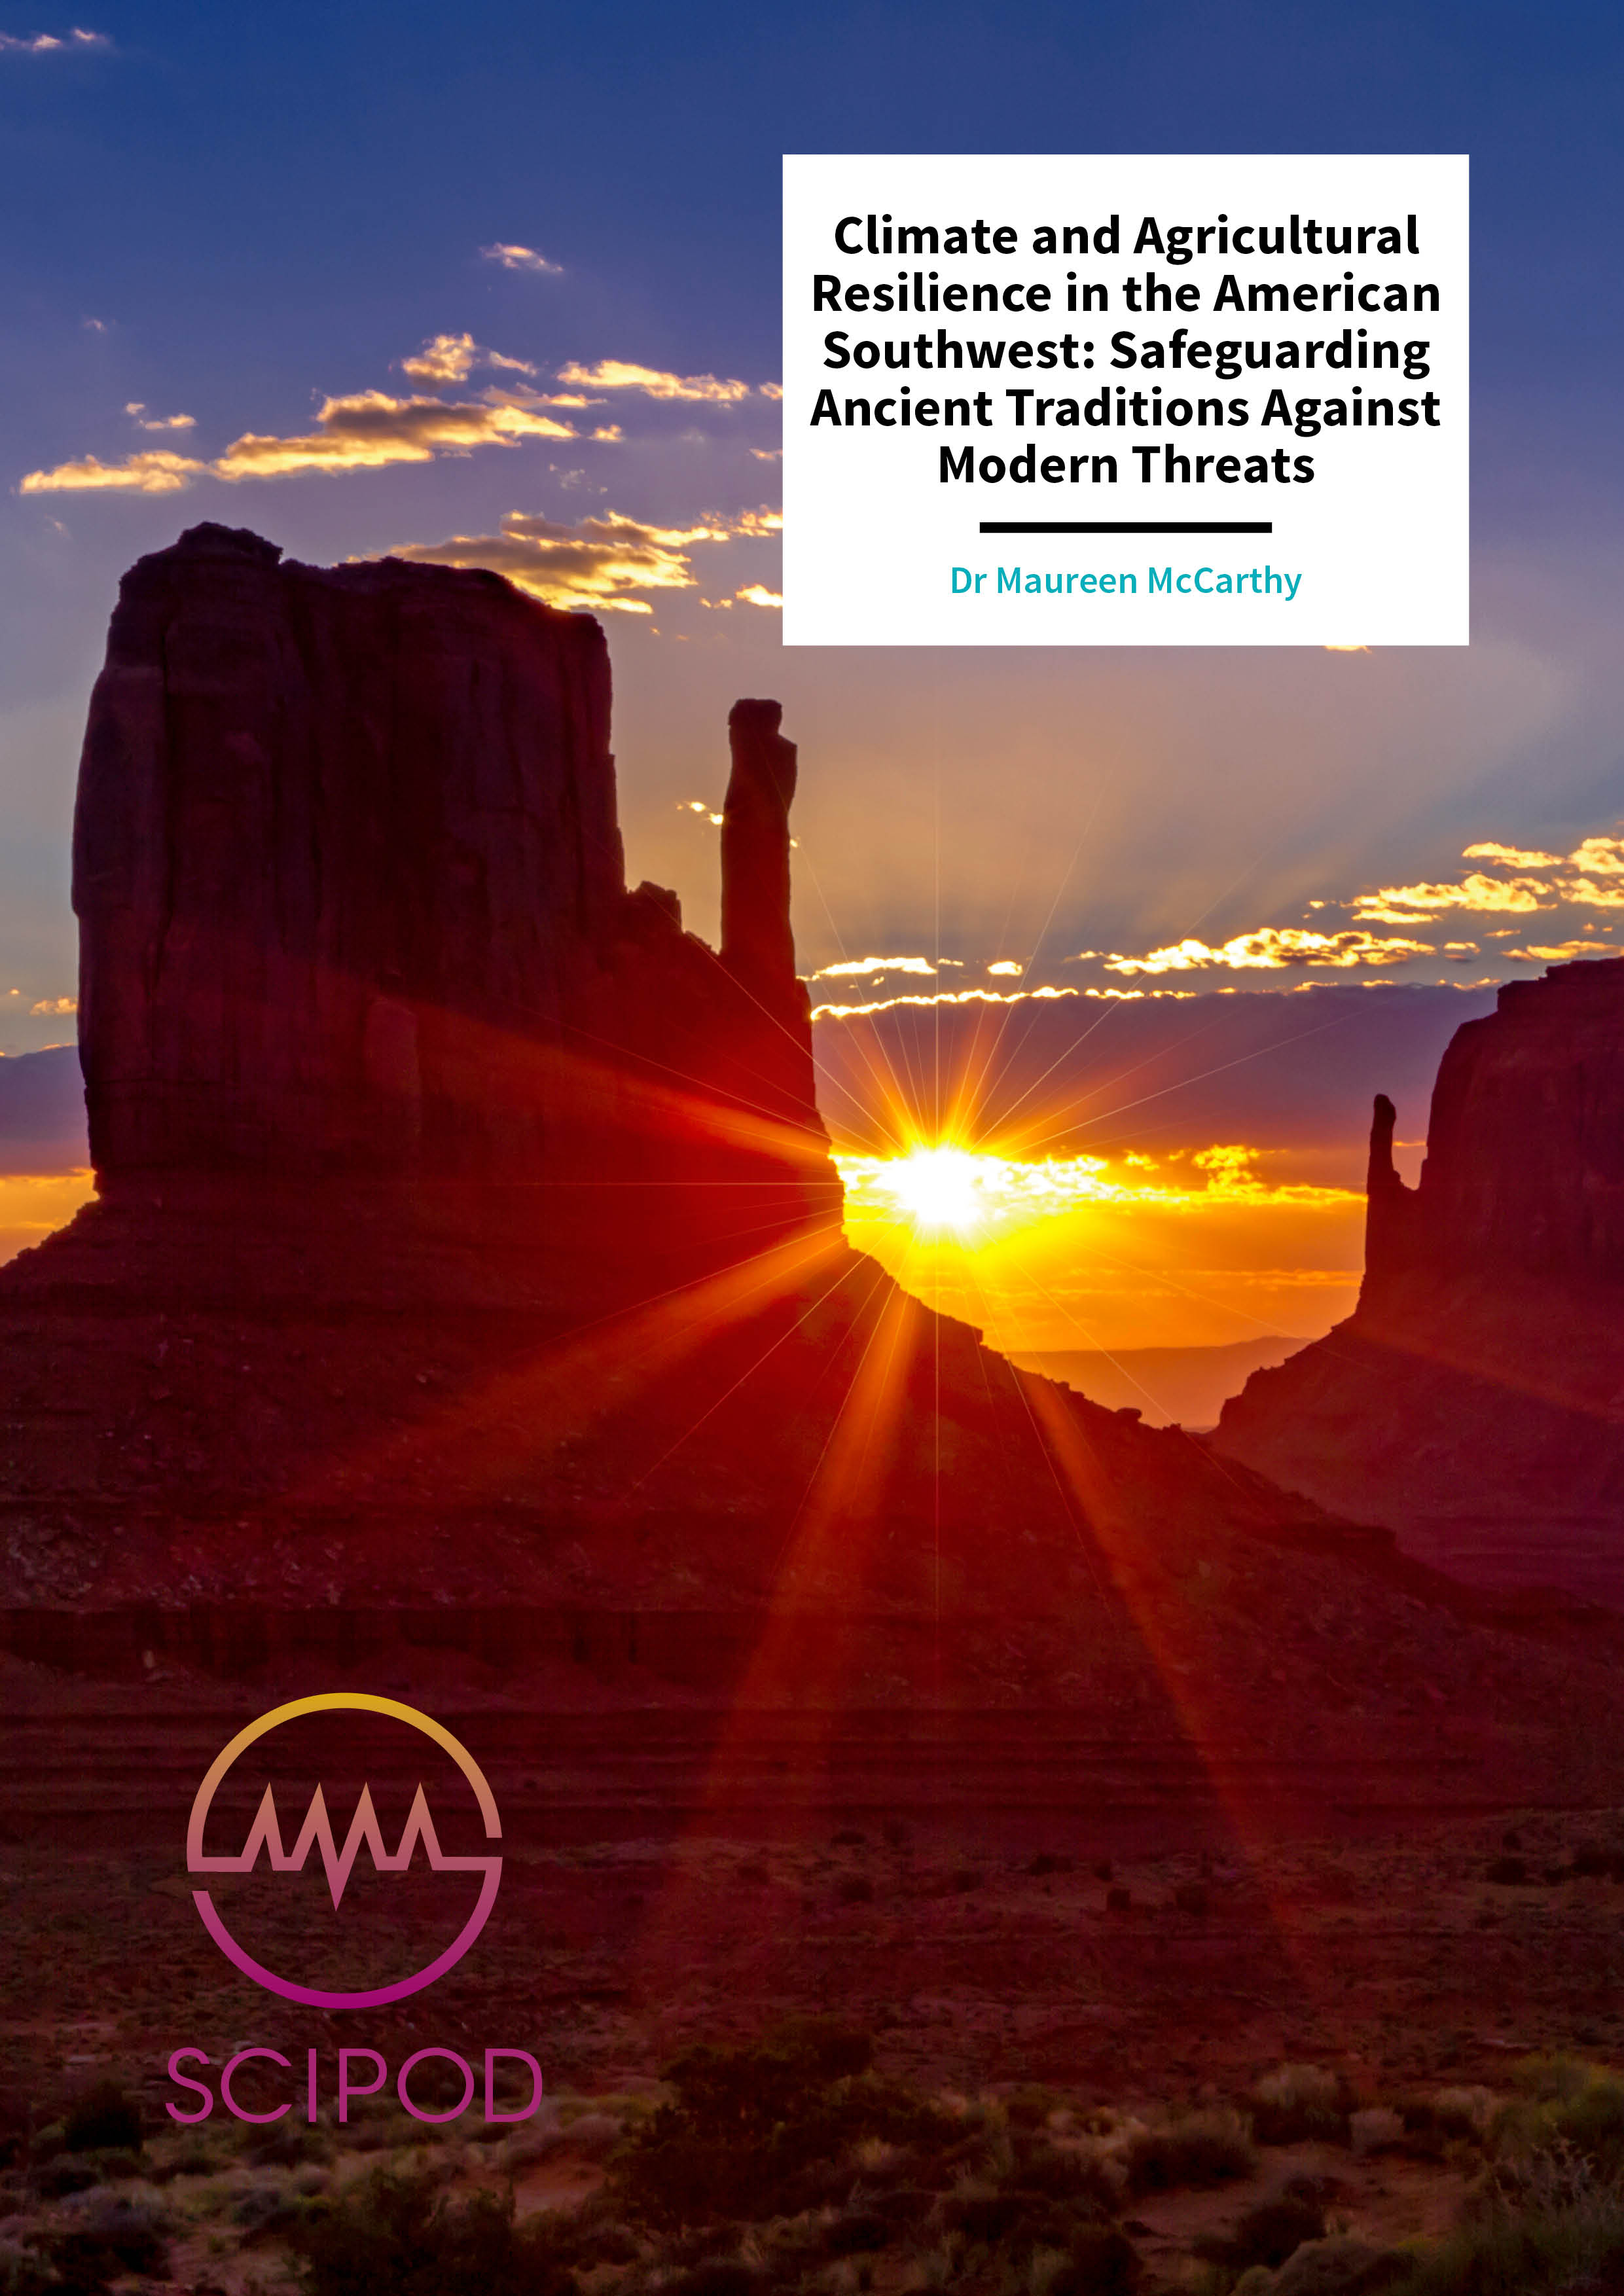 Climate and Agricultural Resilience in the American Southwest Safeguarding Ancient Traditions Against Modern Threats – Dr Maureen McCarthy, University of Nevada